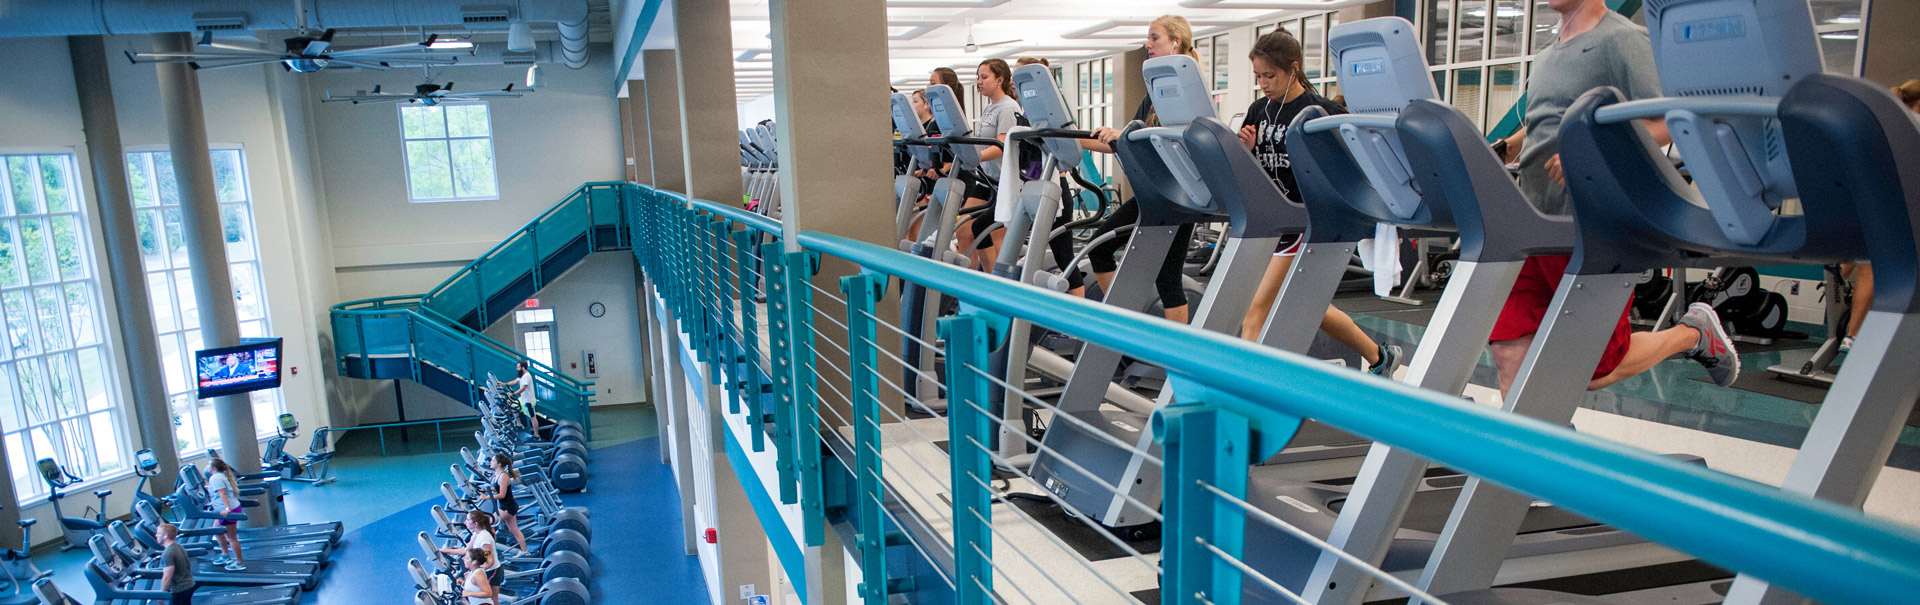 Patrons use the cardio deck and fitness equipment located in the Pat Leonard Student Recreation Center